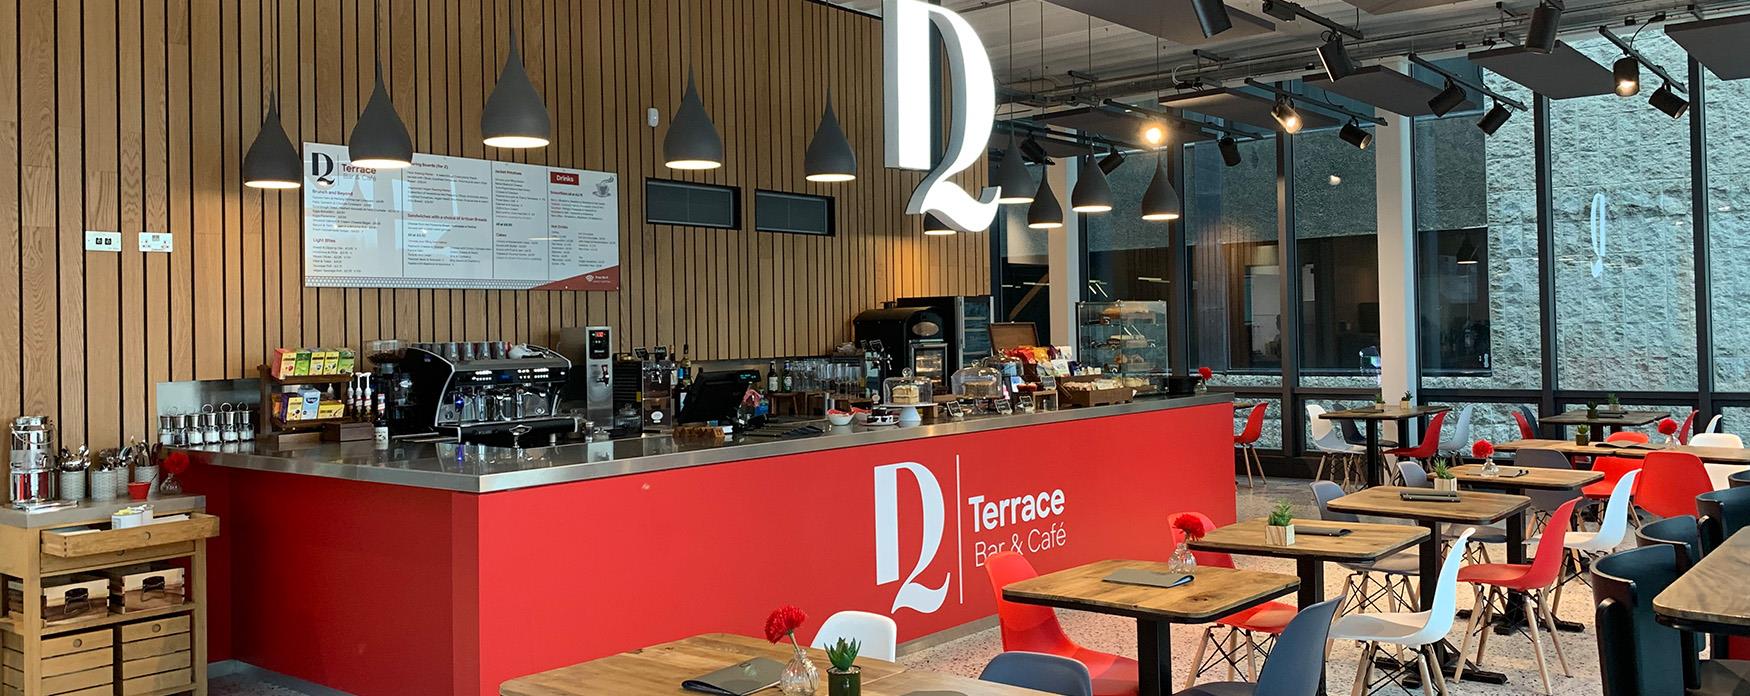 The new DQ Terrace Bar & Cafe has spectacular views of Devonshire Park.